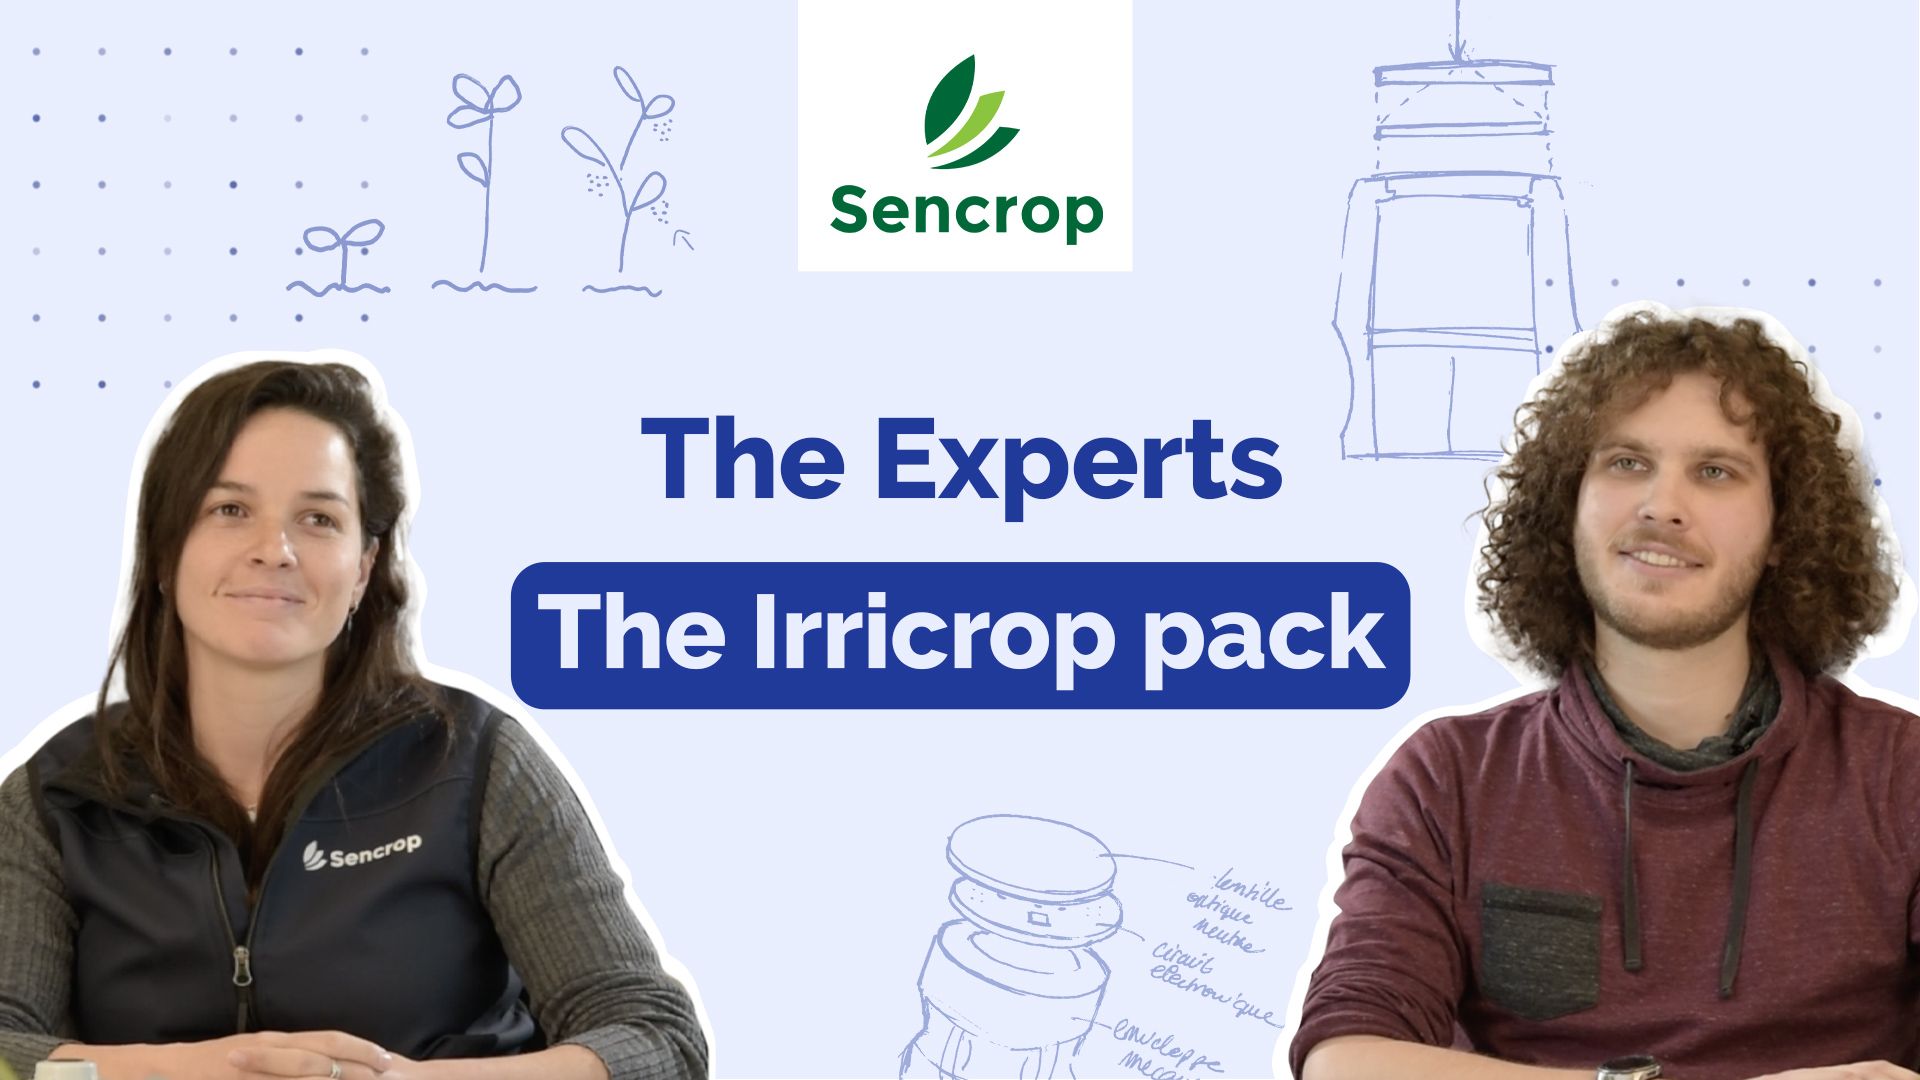 Our experts talk about it : Irricrop, an innovative solution for irrigation